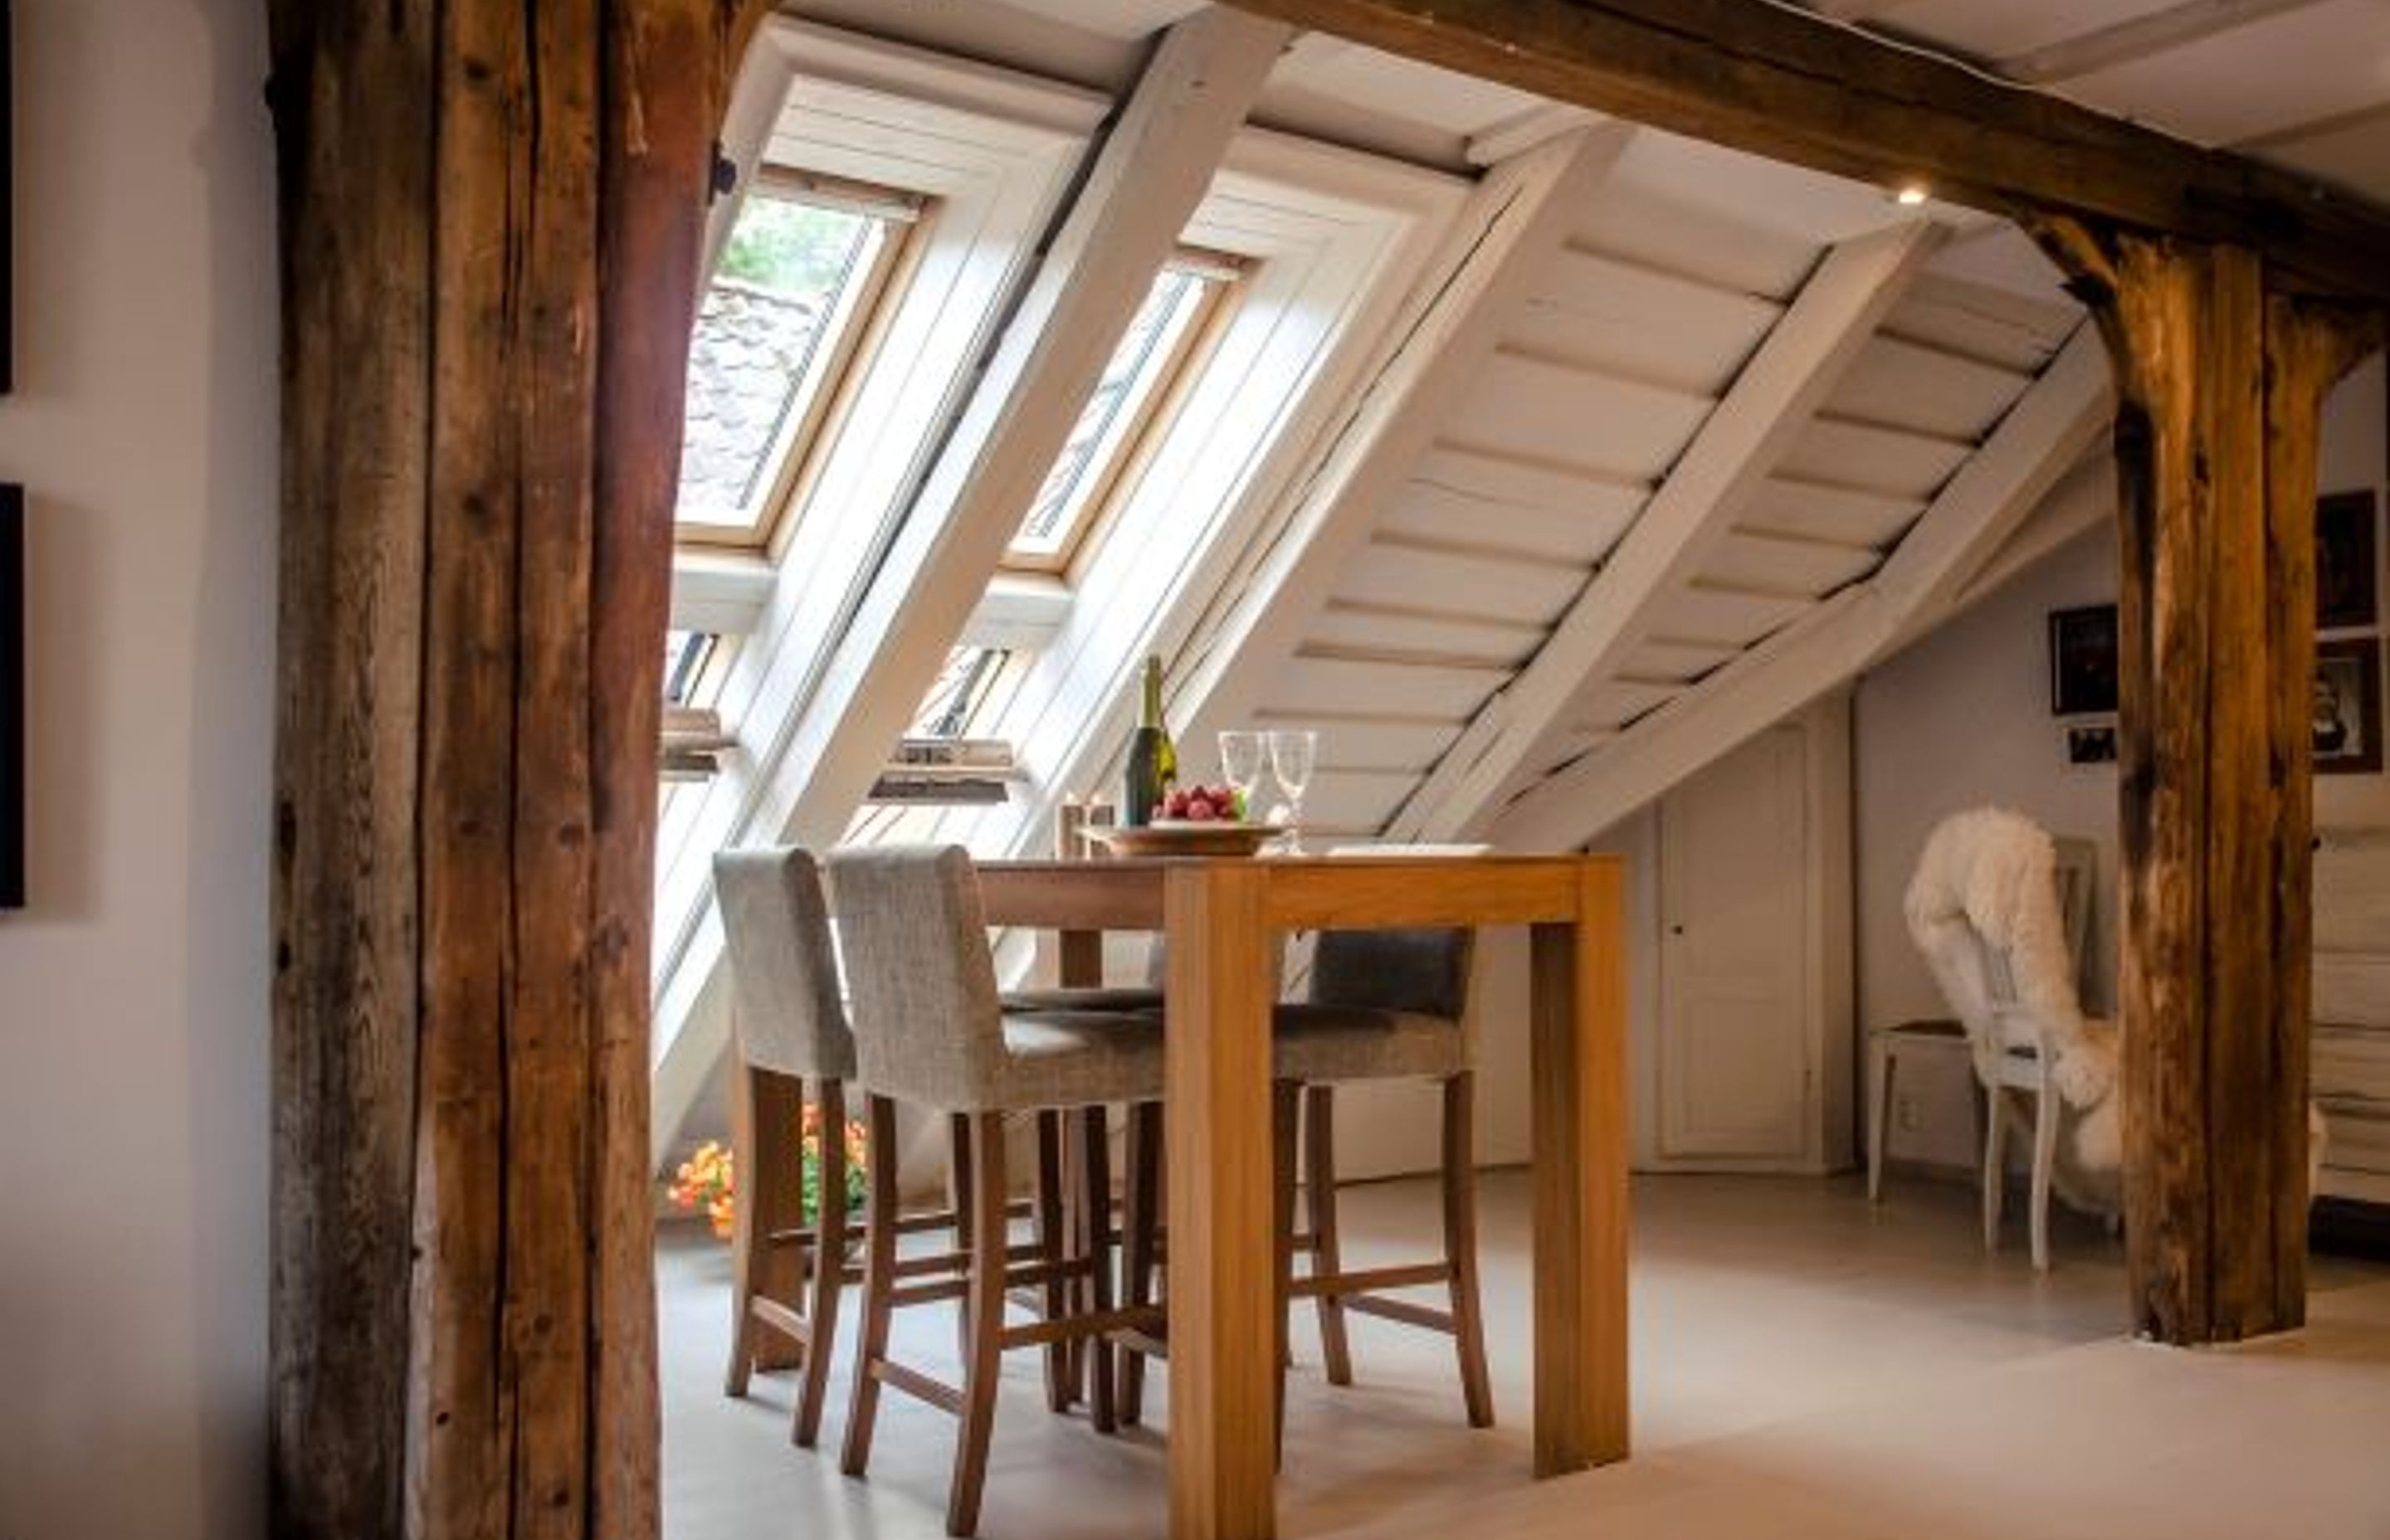 The skylights in this roof conversion makes the space look bigger and more open